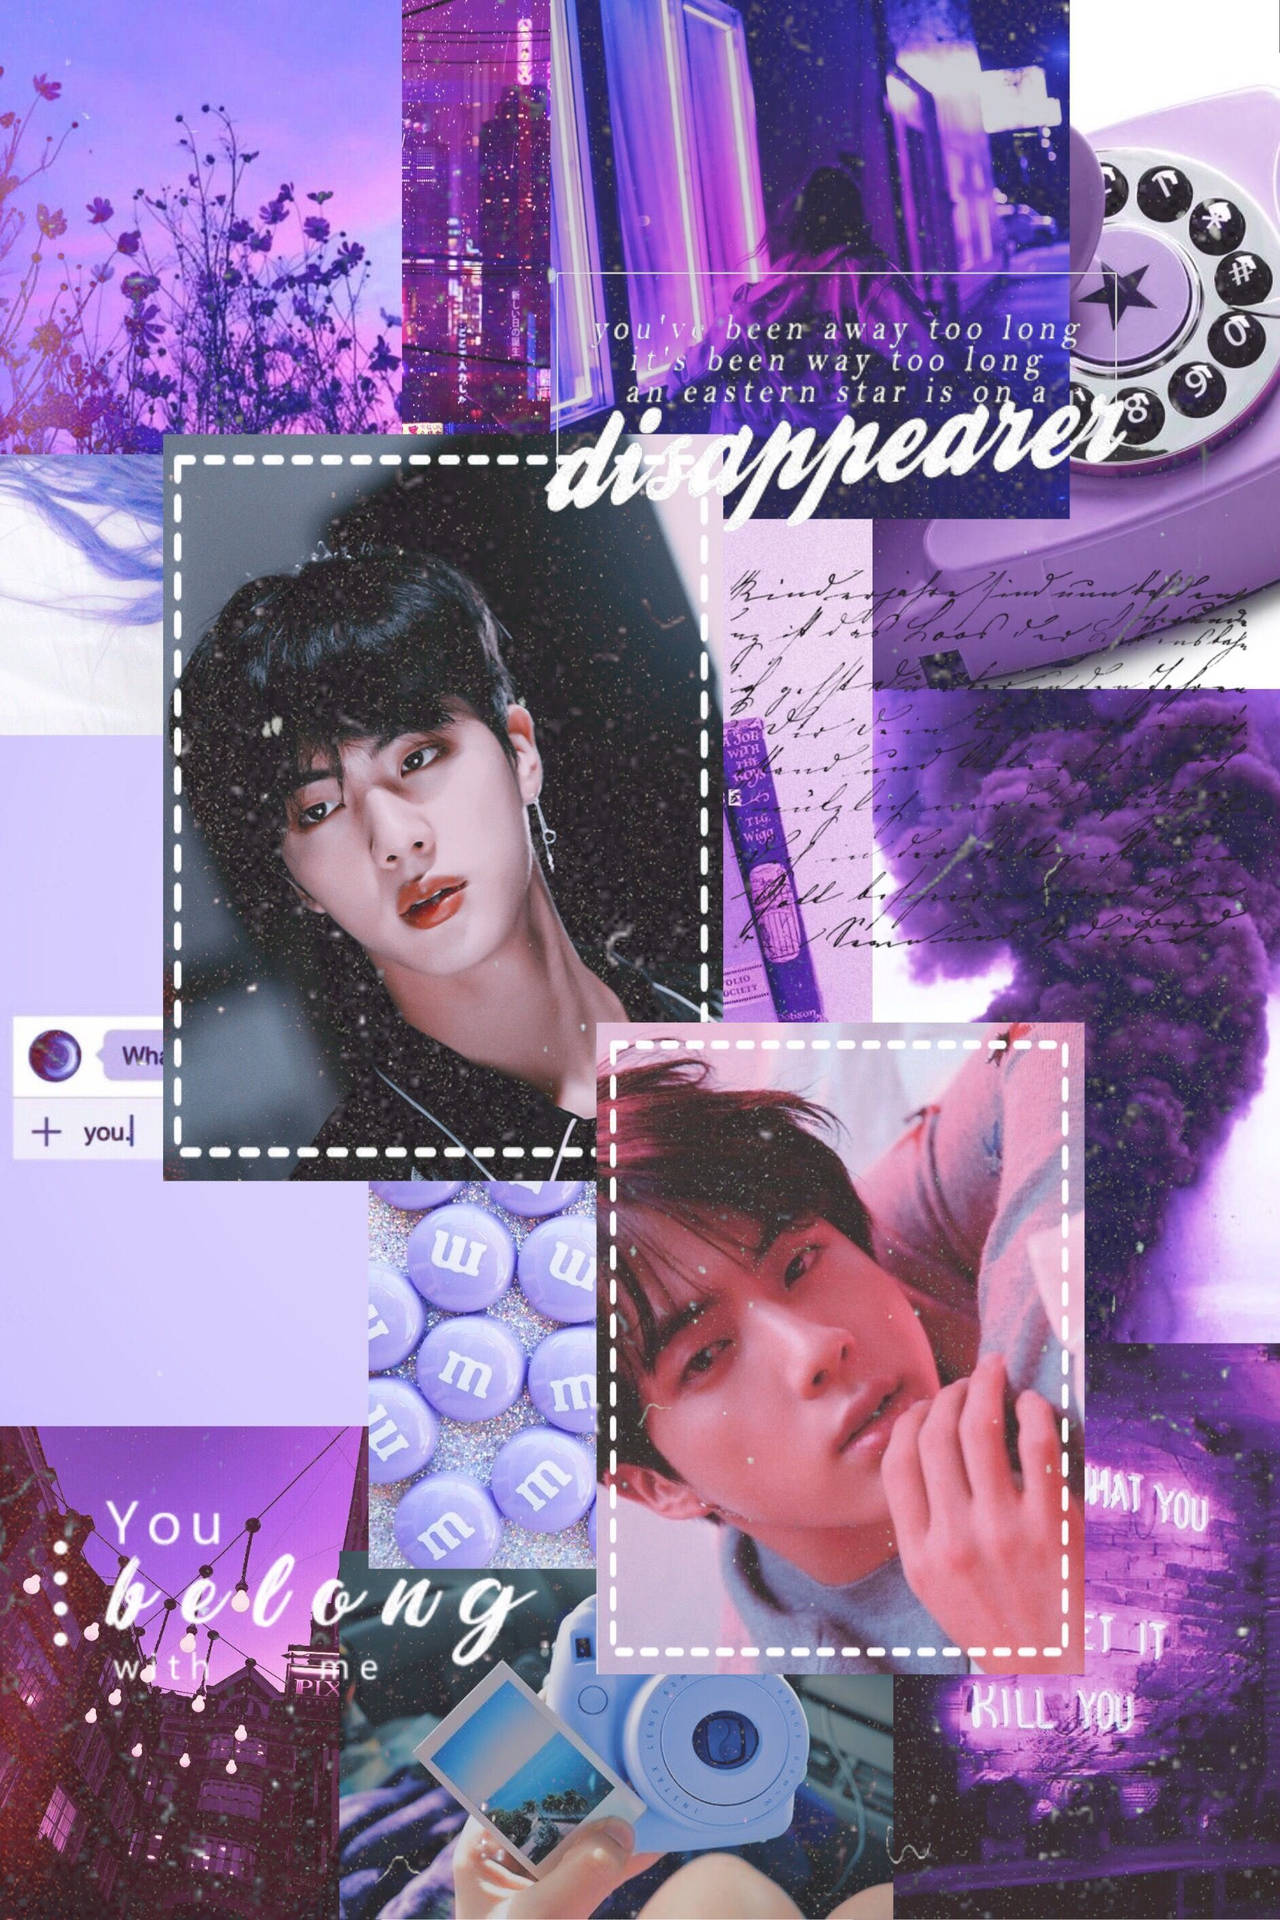 Top 999+ Bts Jin Aesthetic Wallpaper Full HD, 4K Free to Use